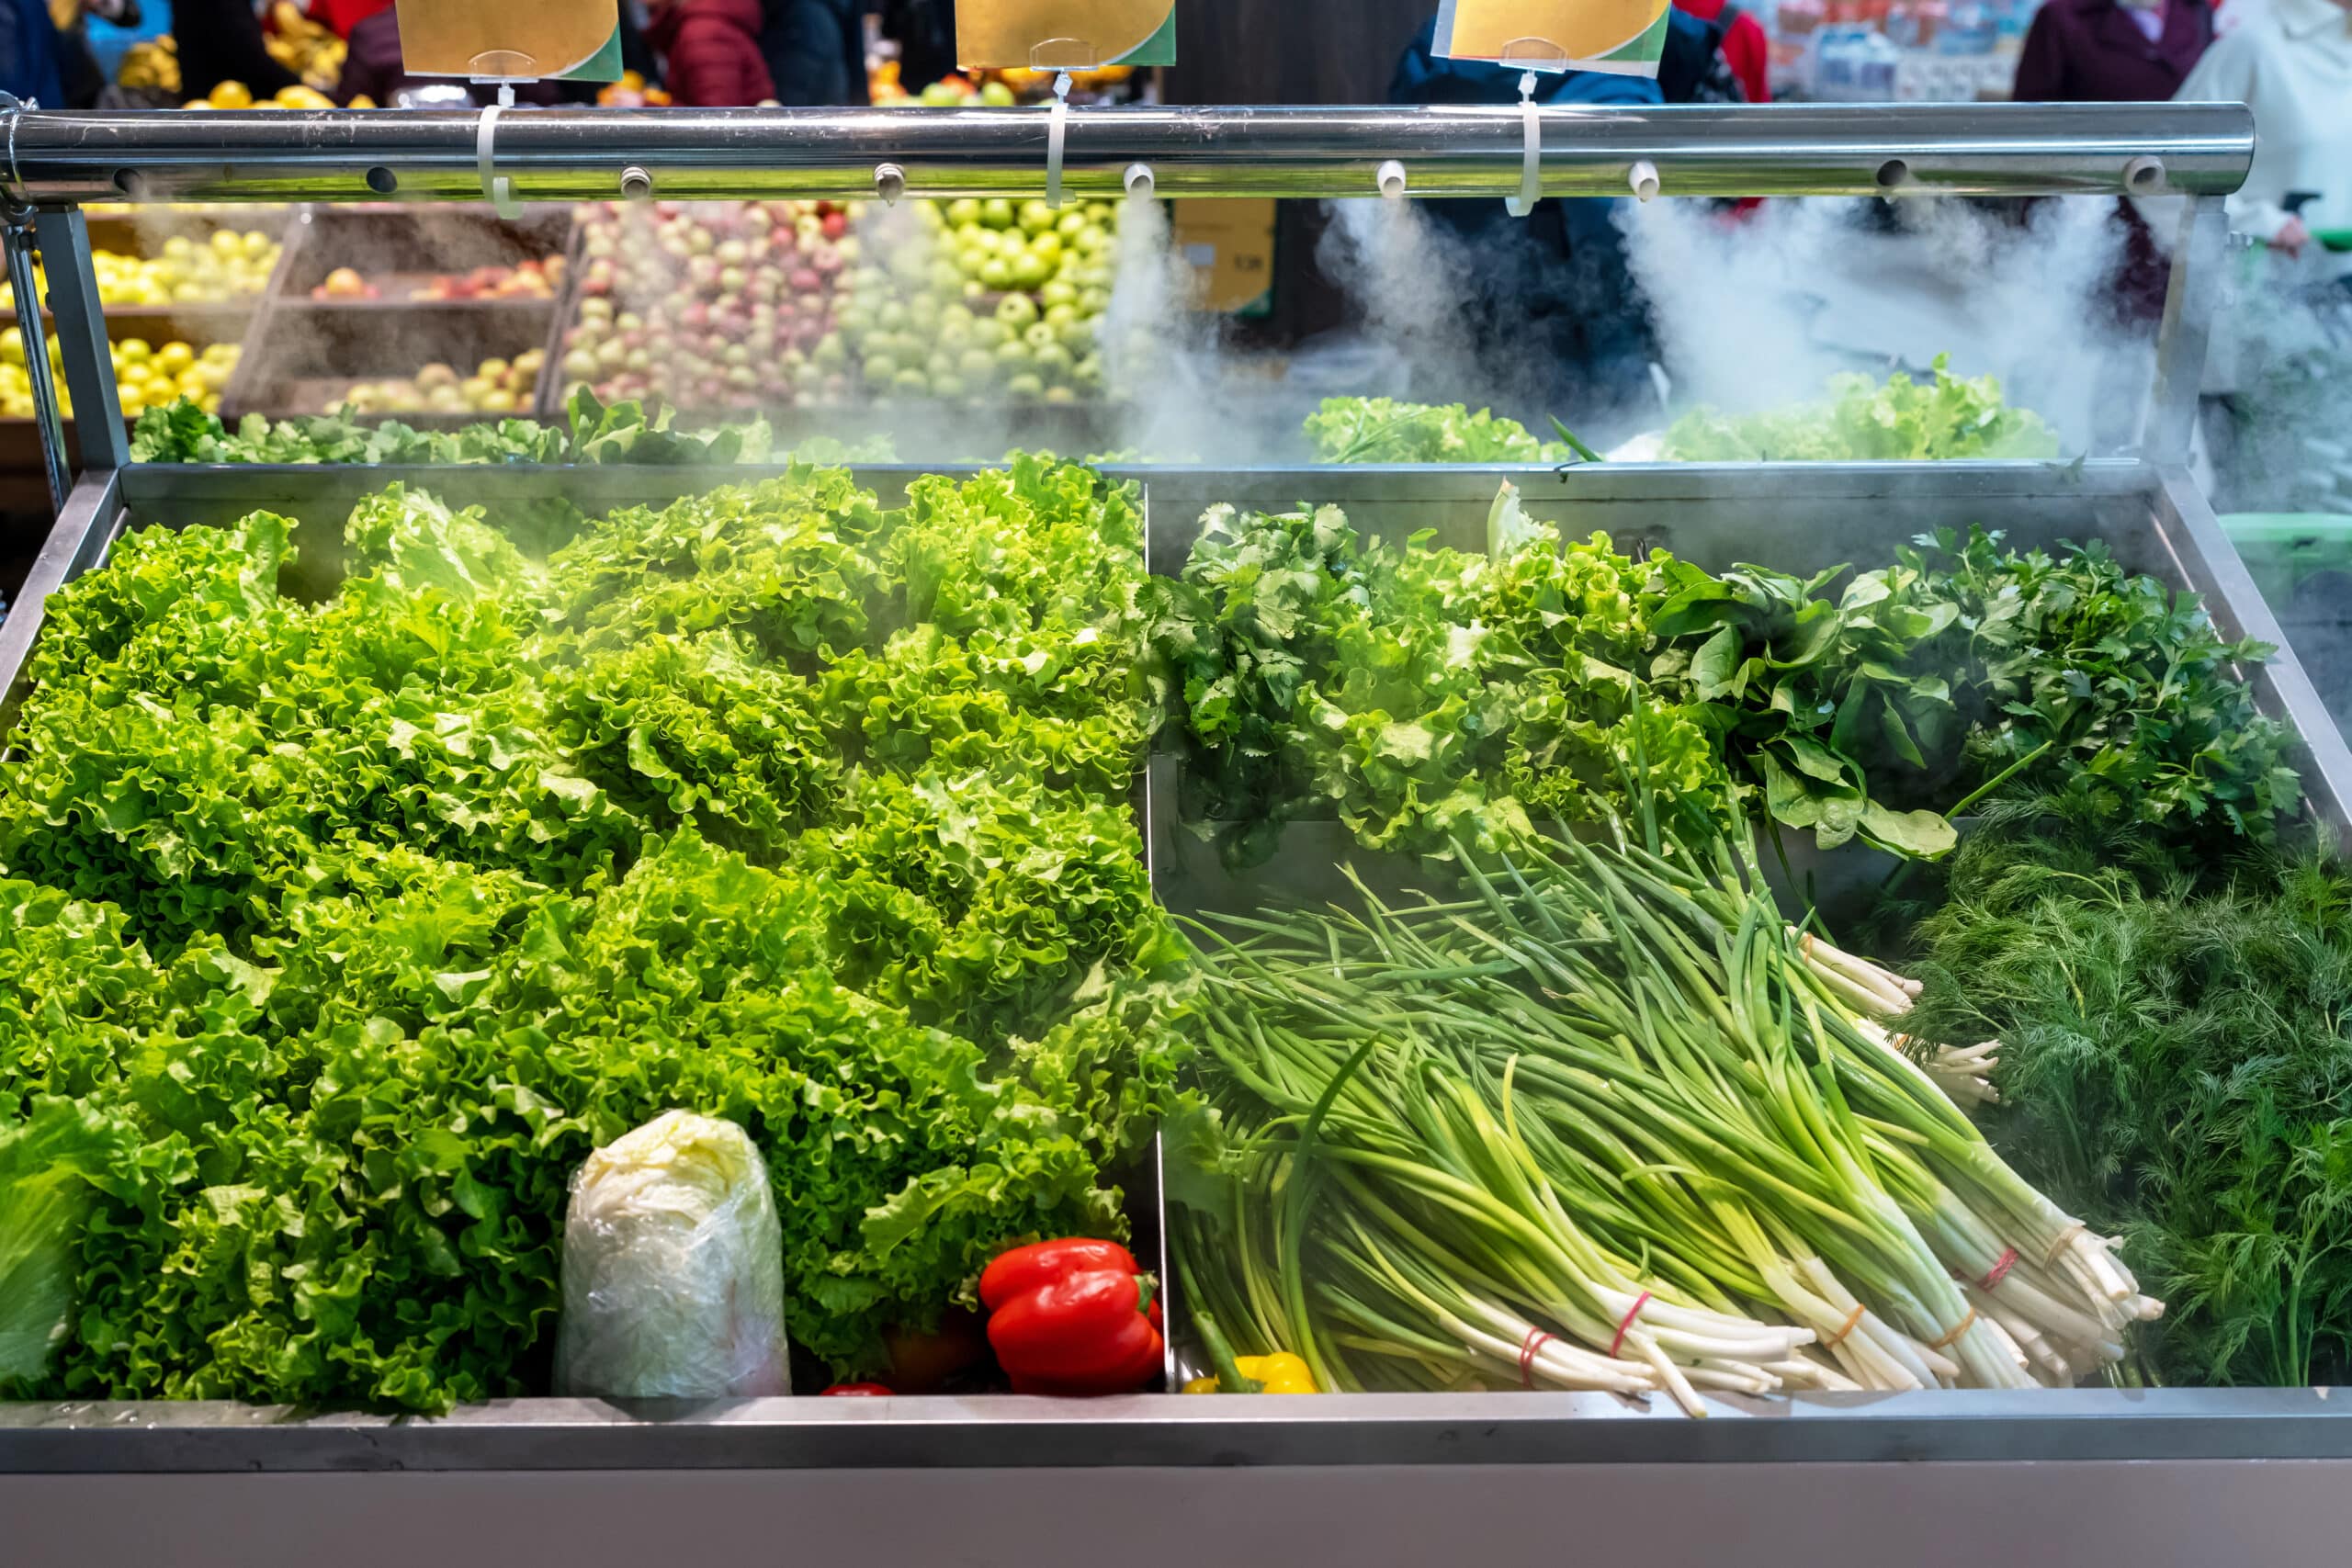 In a green grocer's vegetable display, water sprays over lettuce, parsley, spinach, dill, red peppers and chives where ANACONDA SEALTITE® Food Grade conduit can protect wiring.